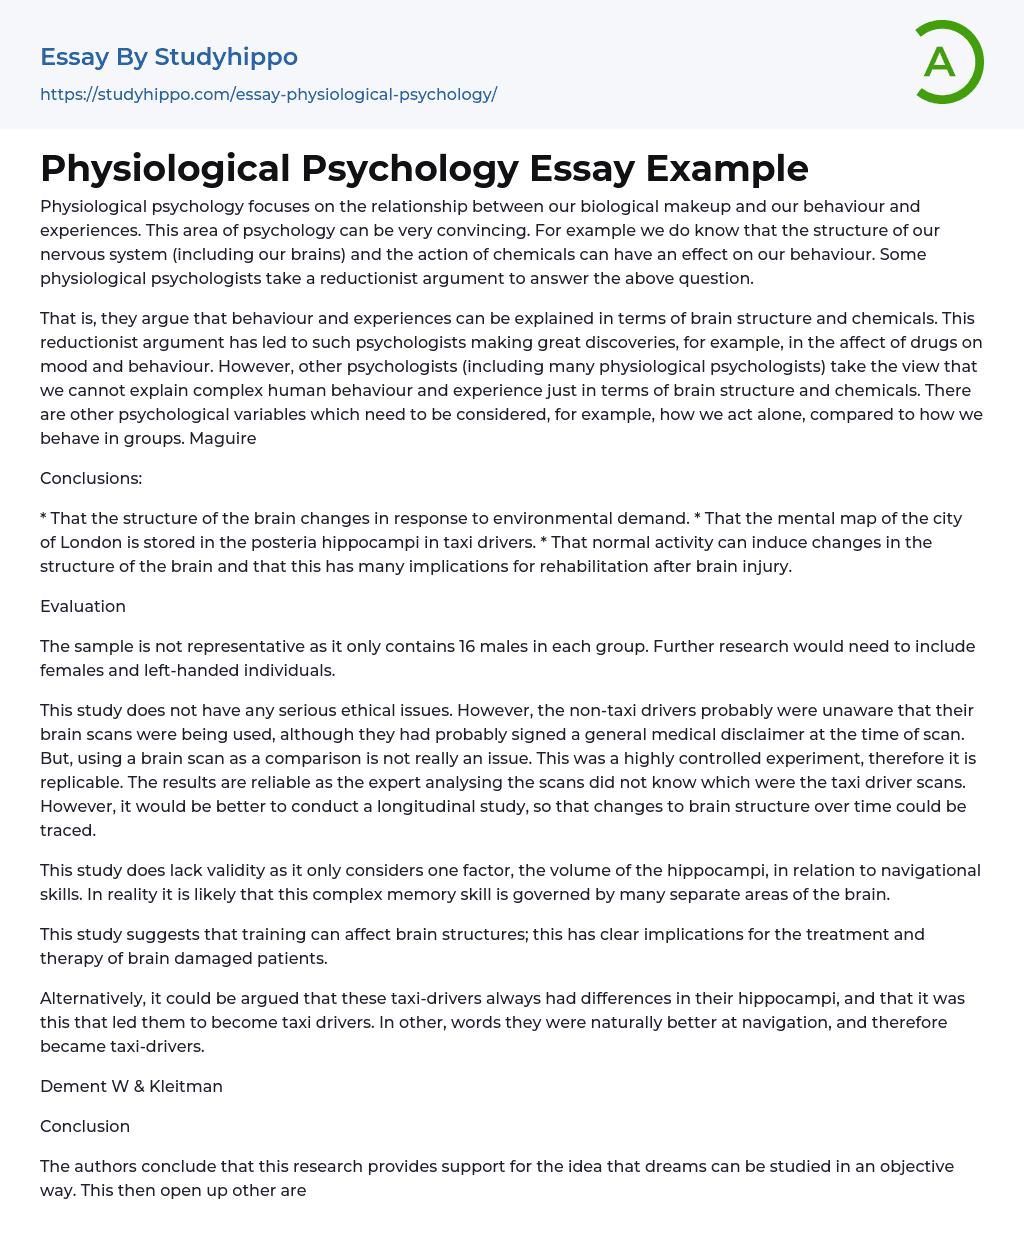 Physiological Psychology Essay Example